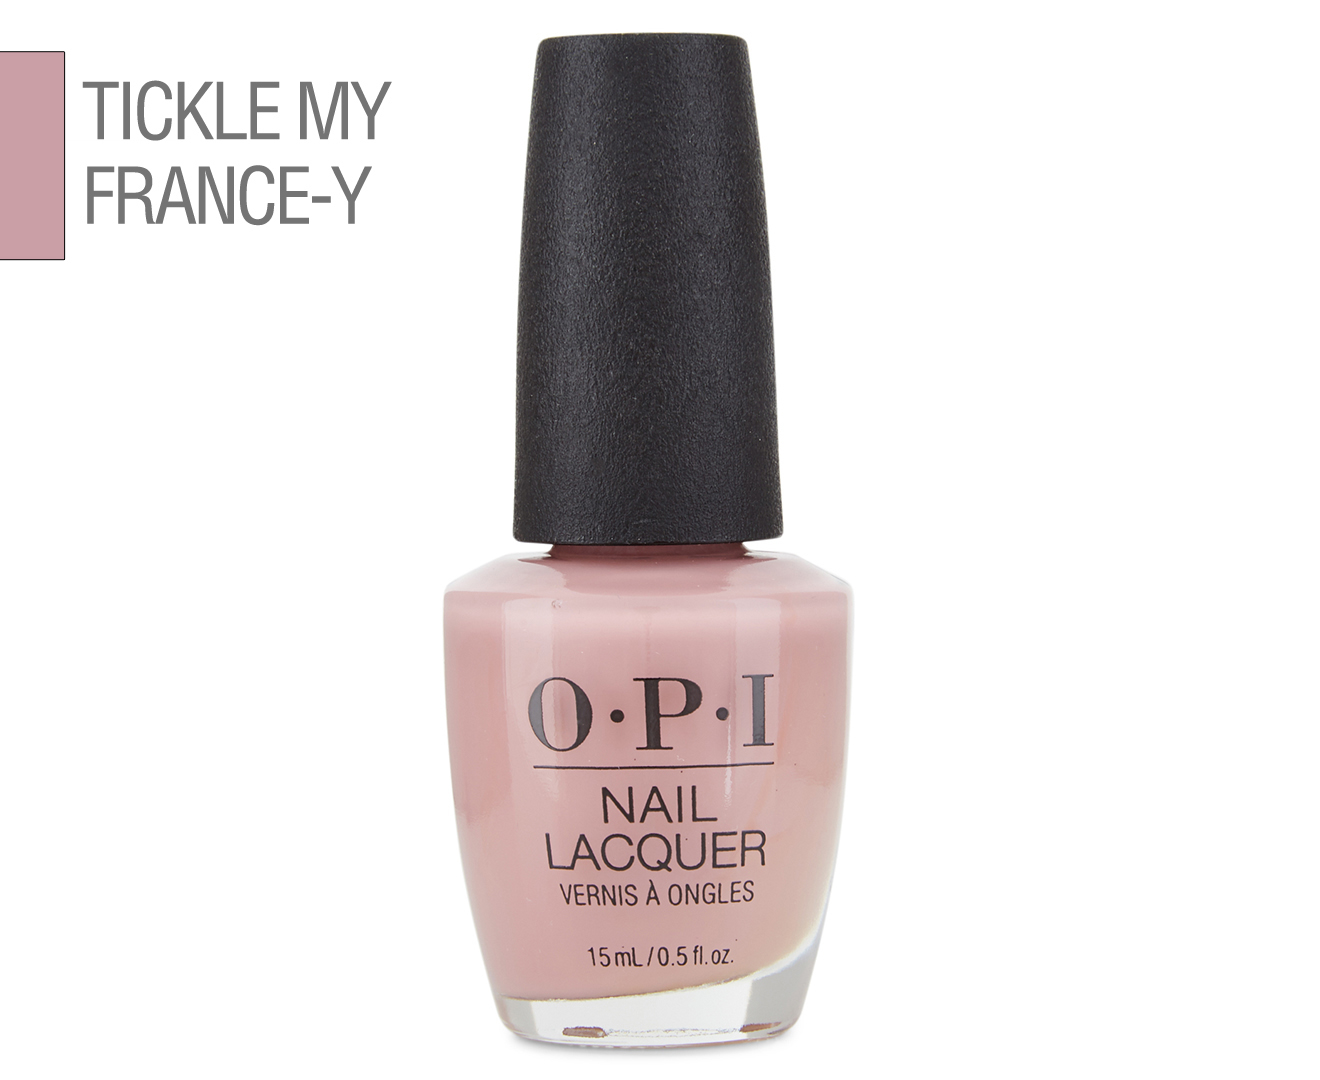 9. OPI Nail Lacquer in "Tickle My France-y" - wide 5